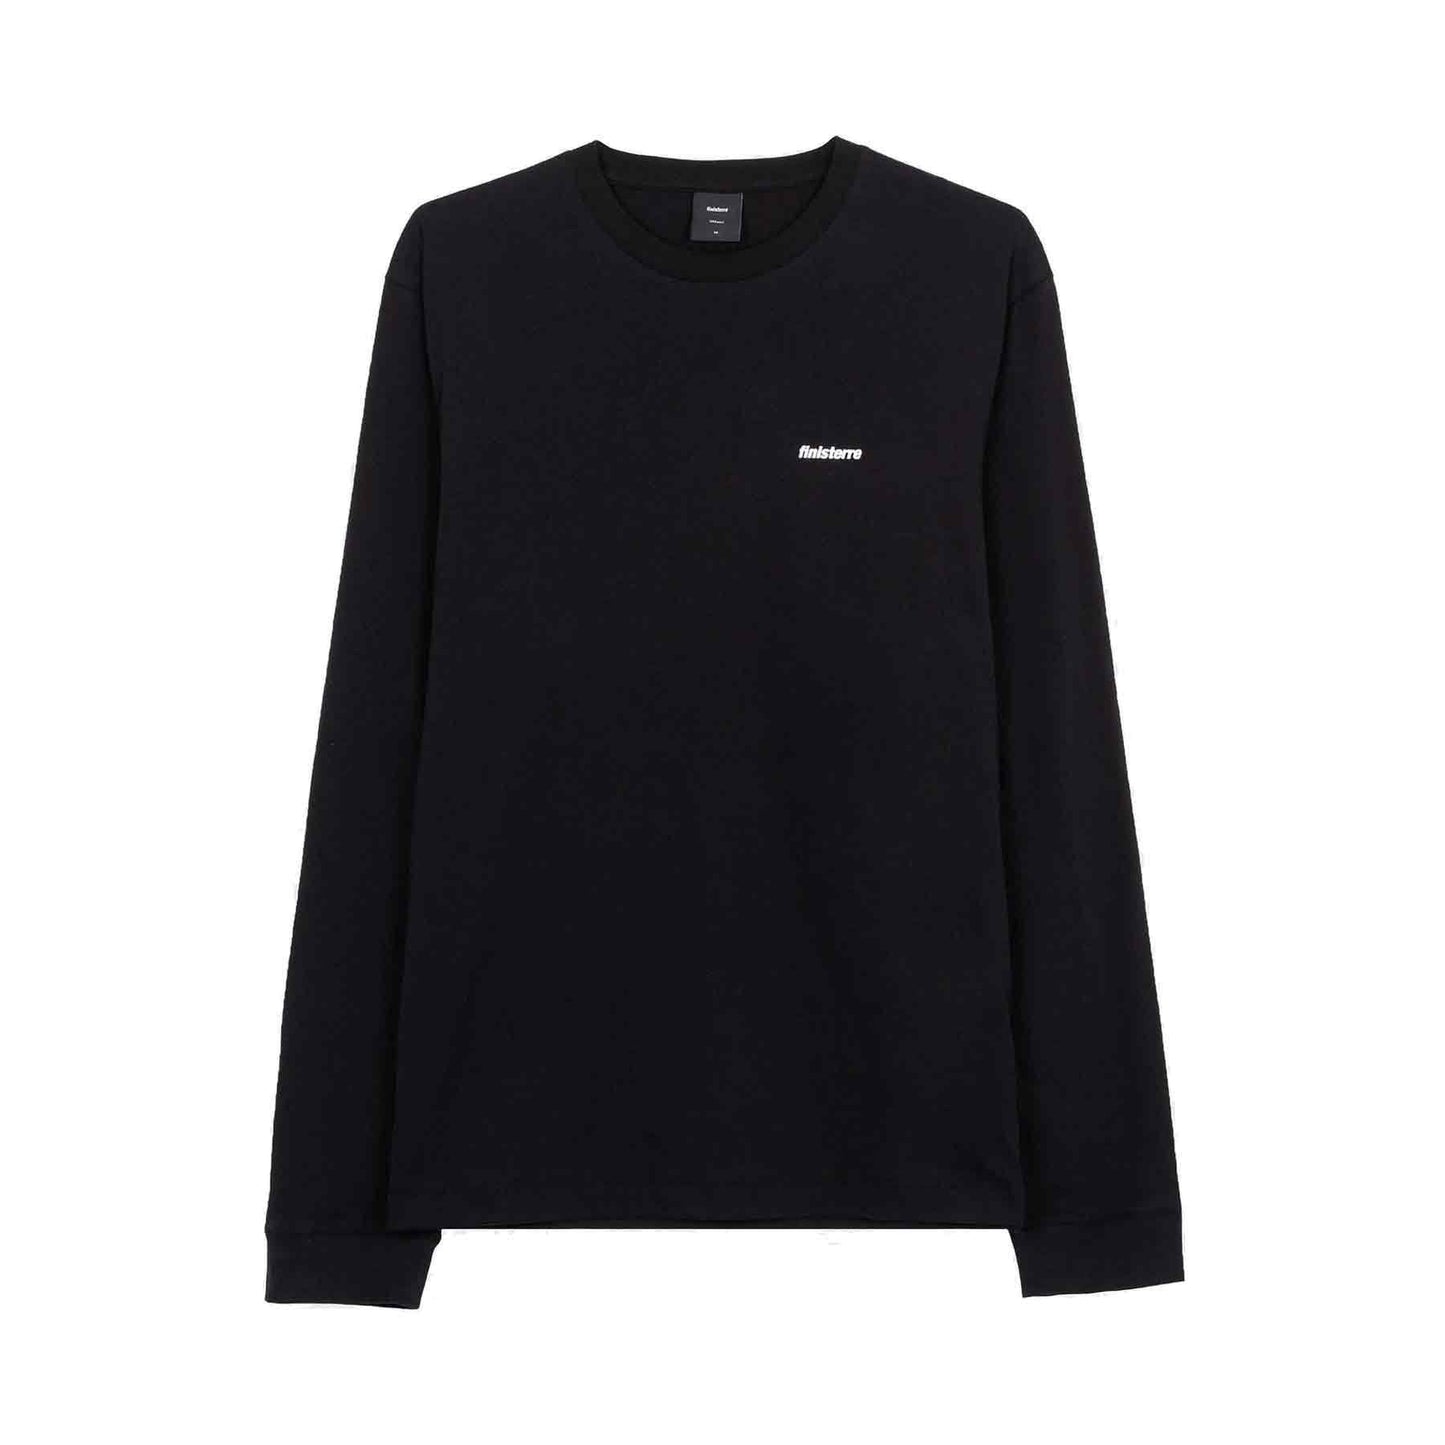 Harlyn Logo LS Tee by Finisterre - The Luxury Promotional Gifts Company Limited